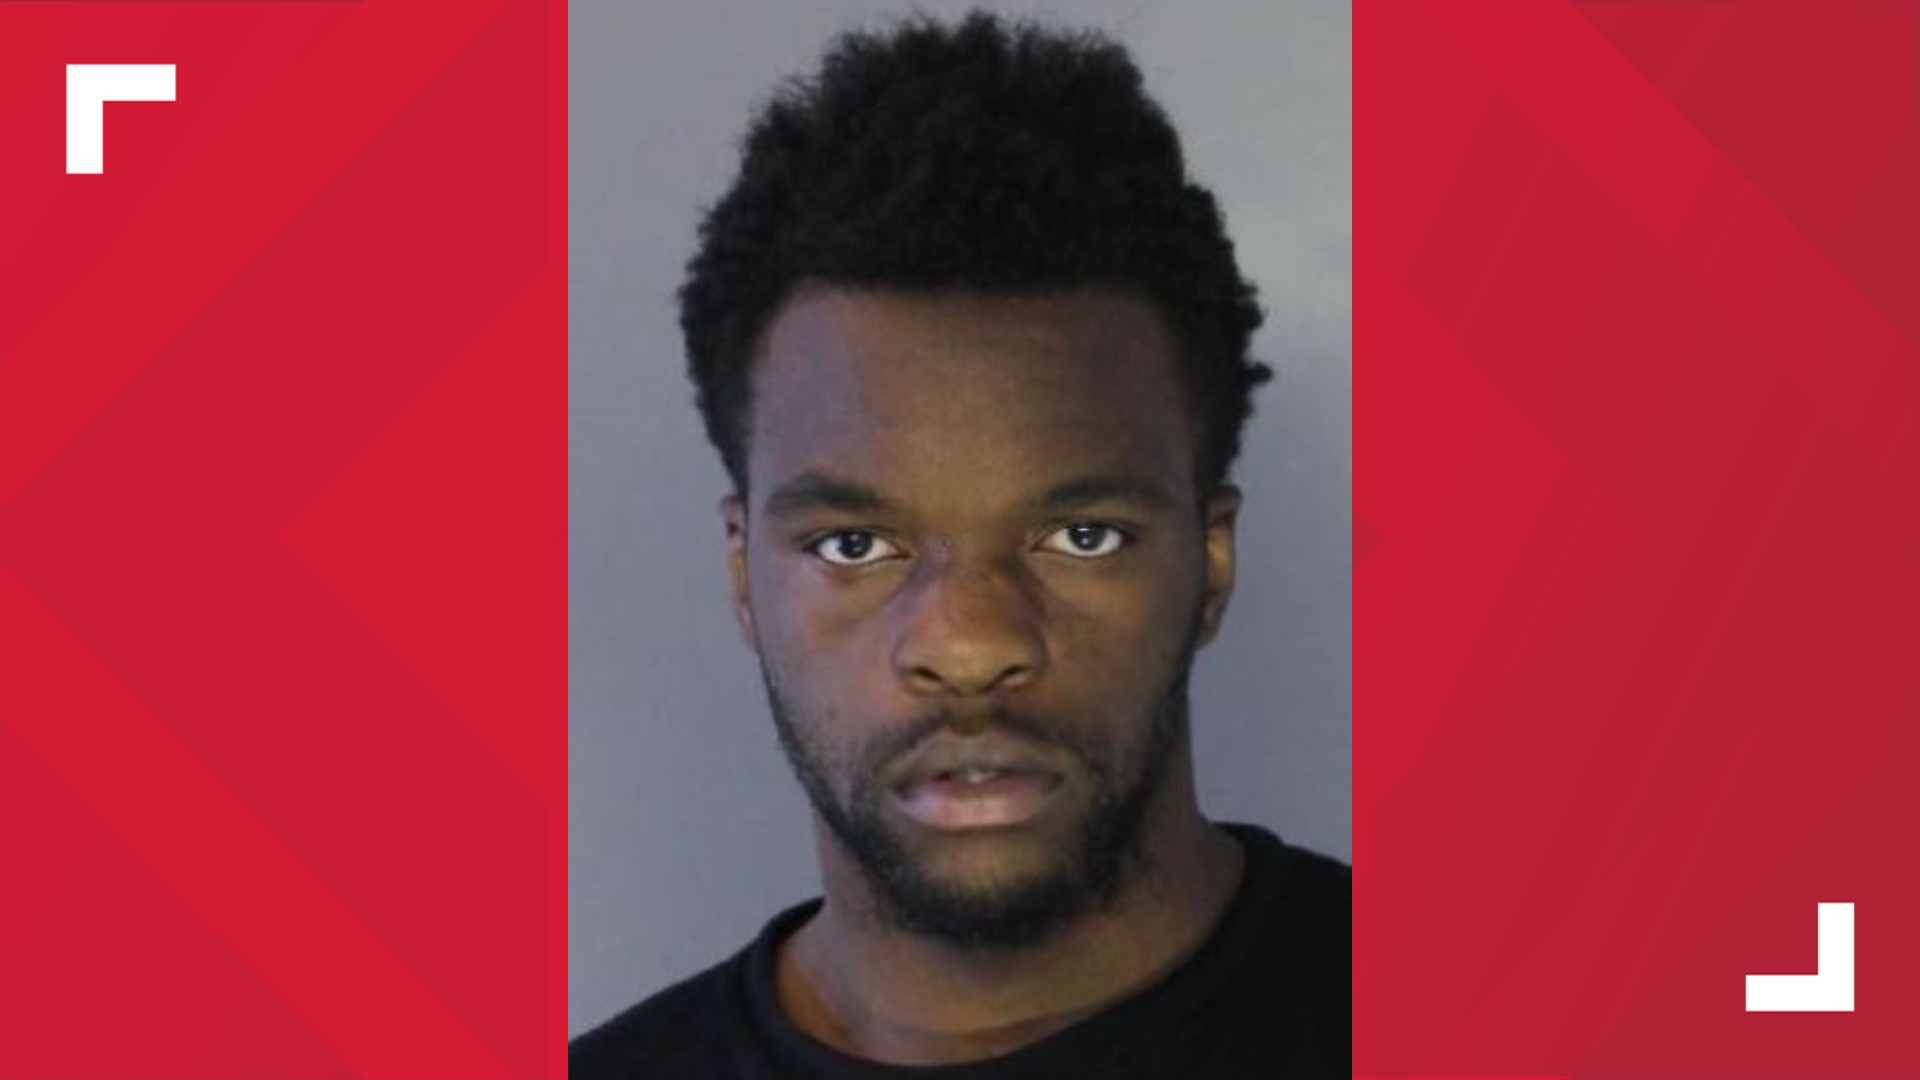 Deron Scott, 21, is charged with criminal homicide in the death of Erin Walsh, who was shot on June 28 on the 1400 block of Berryhill Street.